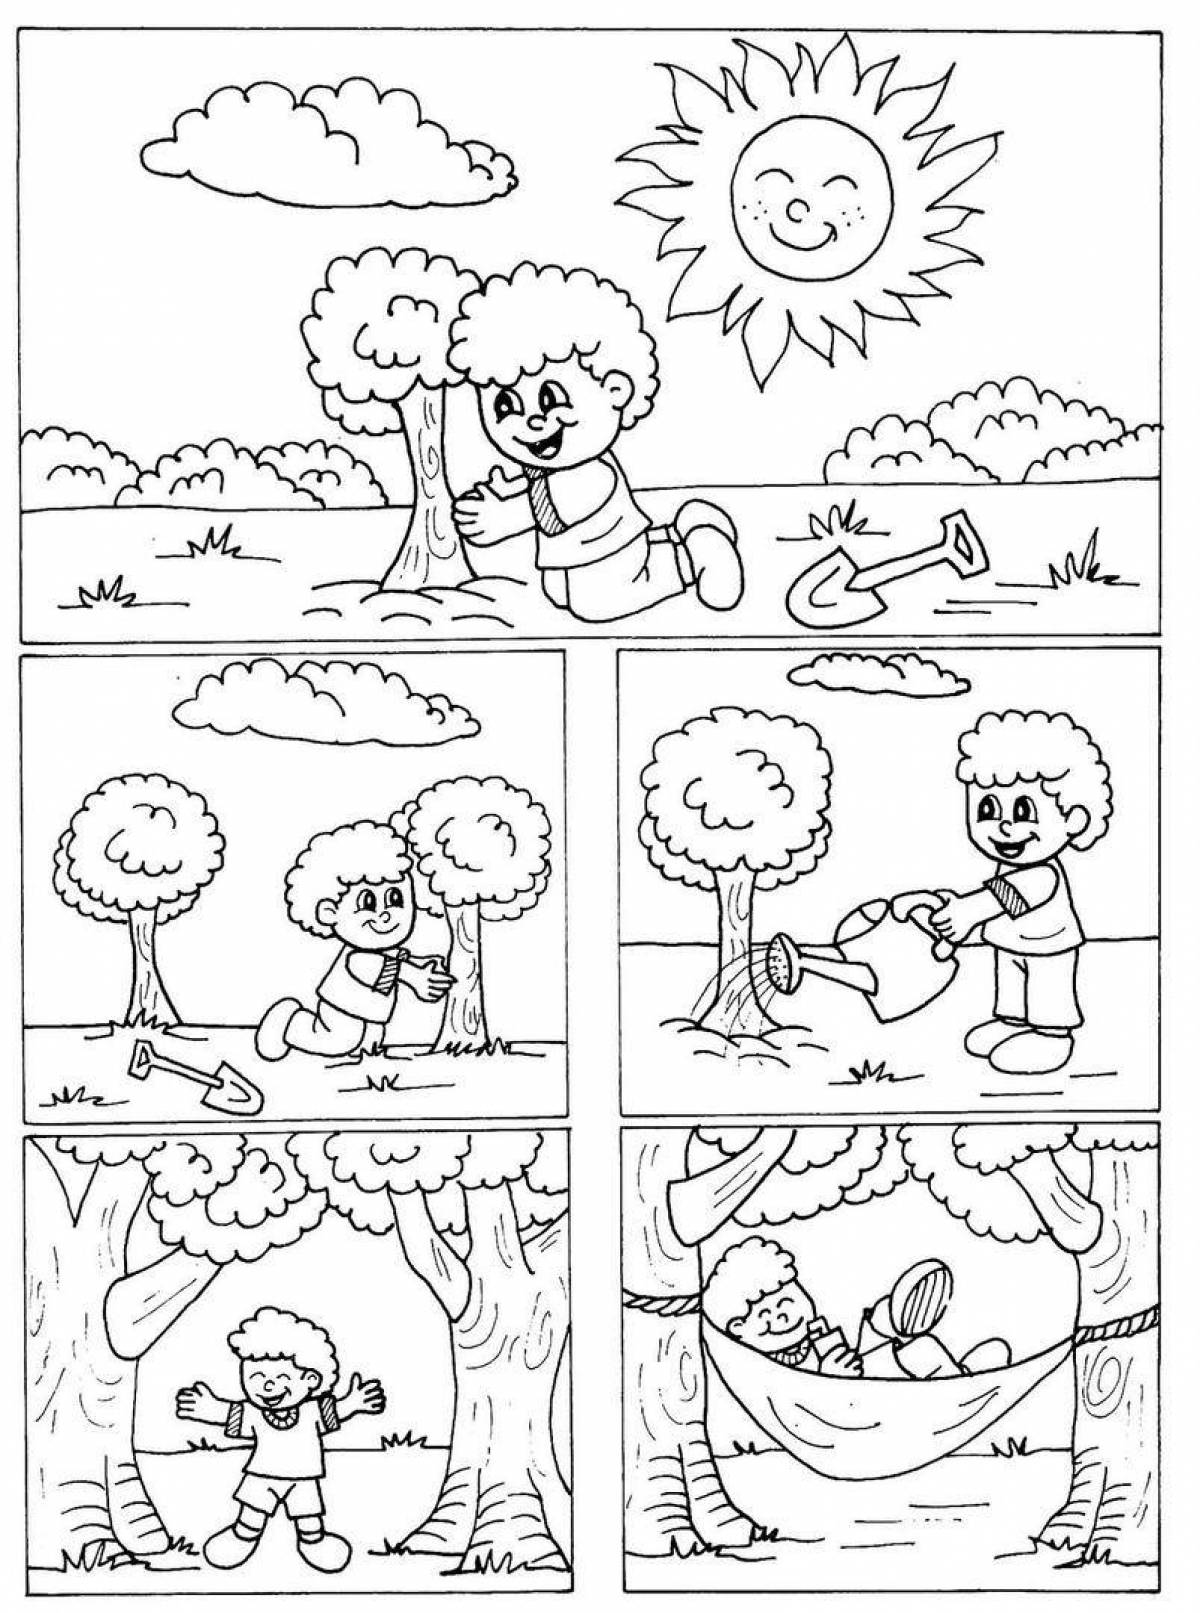 Serene coloring page rules of conduct in nature